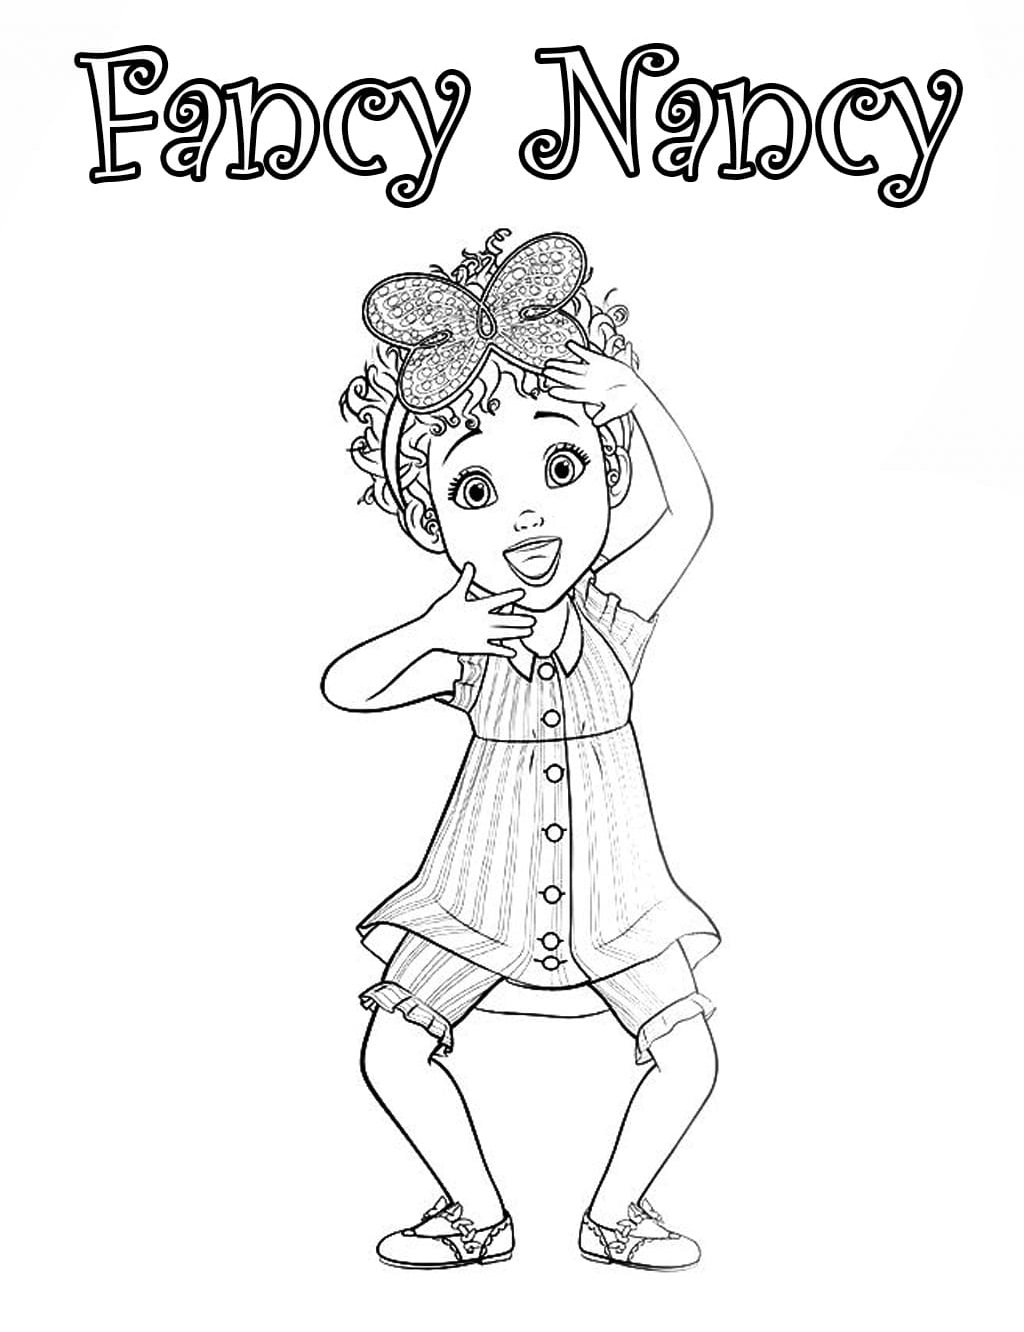 printable fancy nancy coloring pages